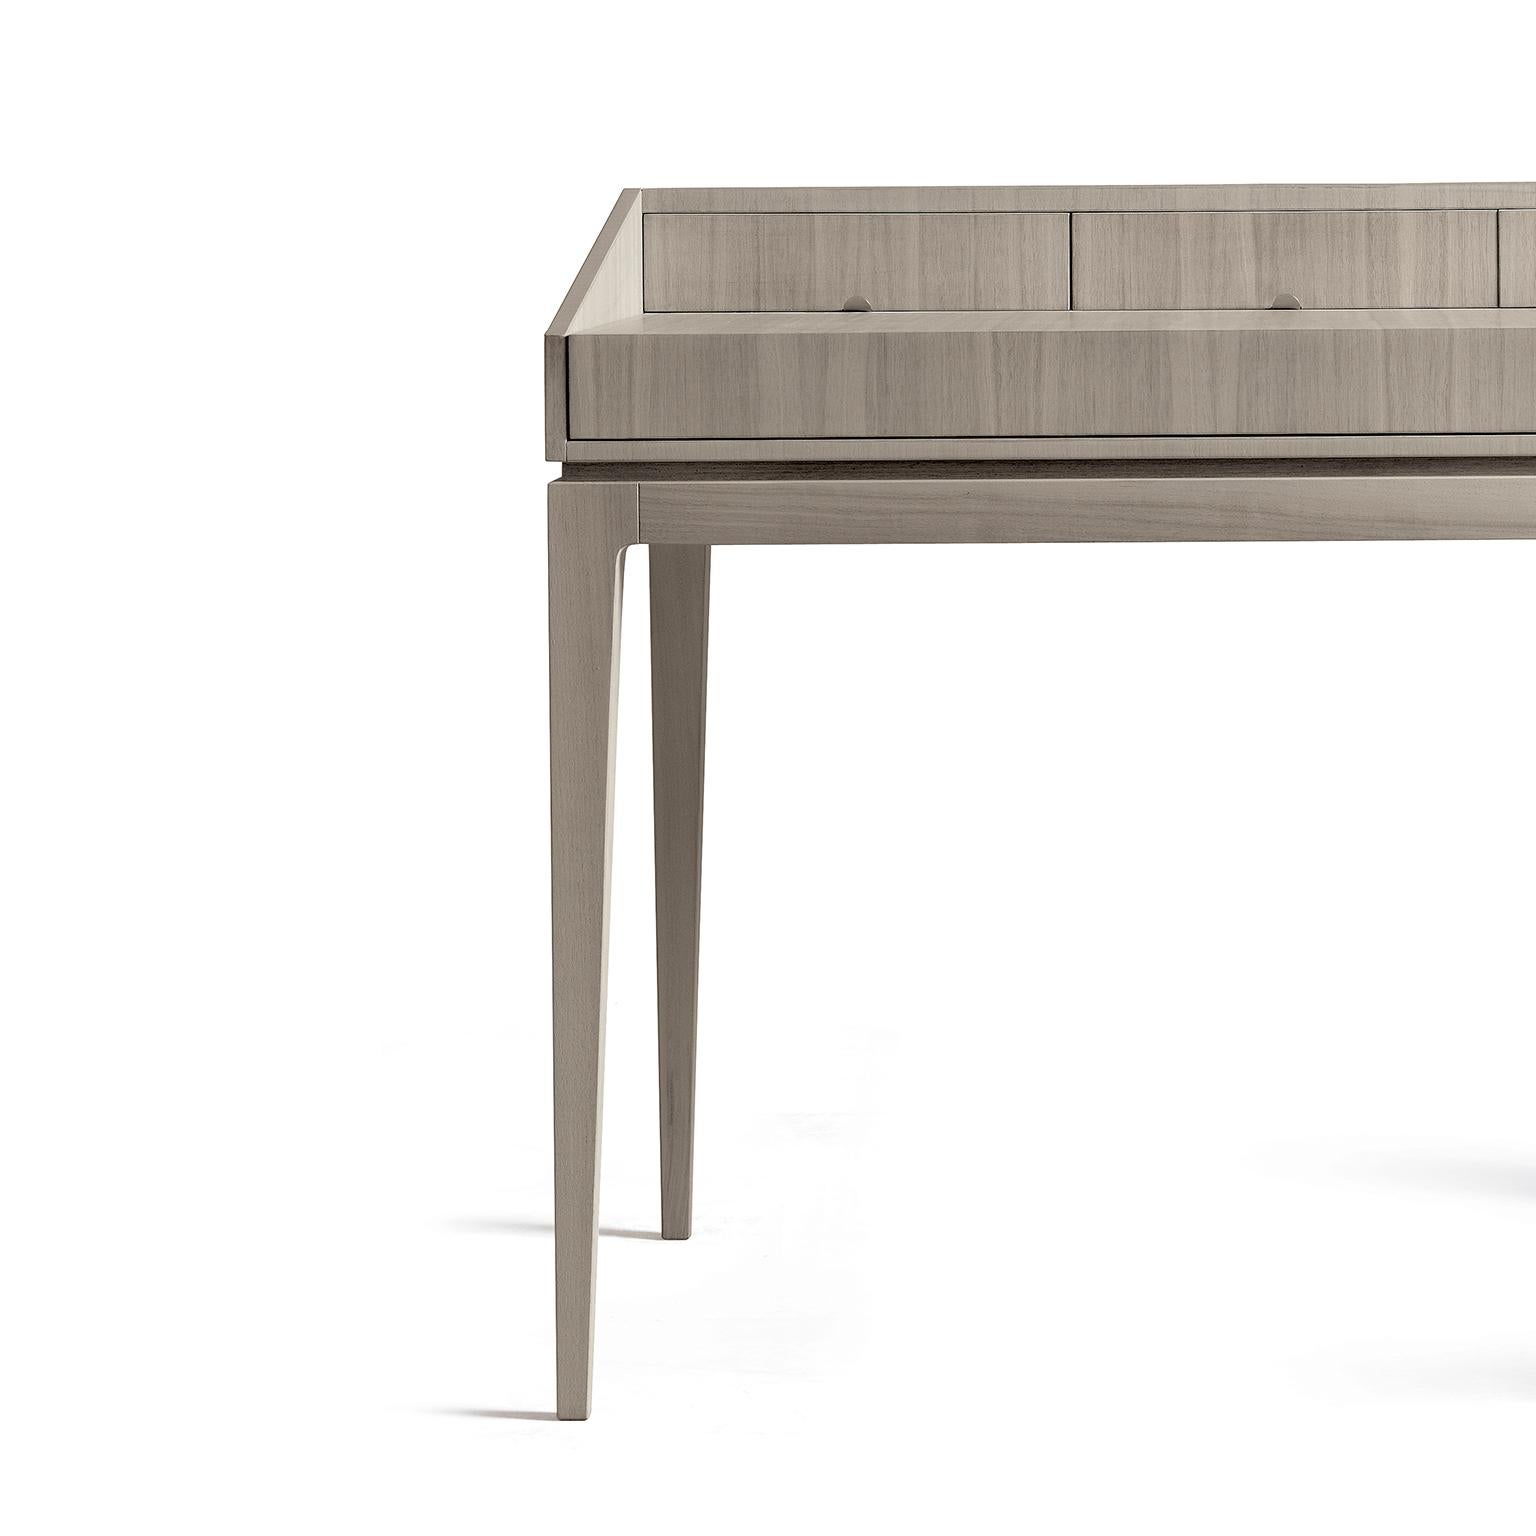 Italian Ideale Solid Wood Desk, Walnut in Hand-Made Natural Grey Finish, Contemporary For Sale